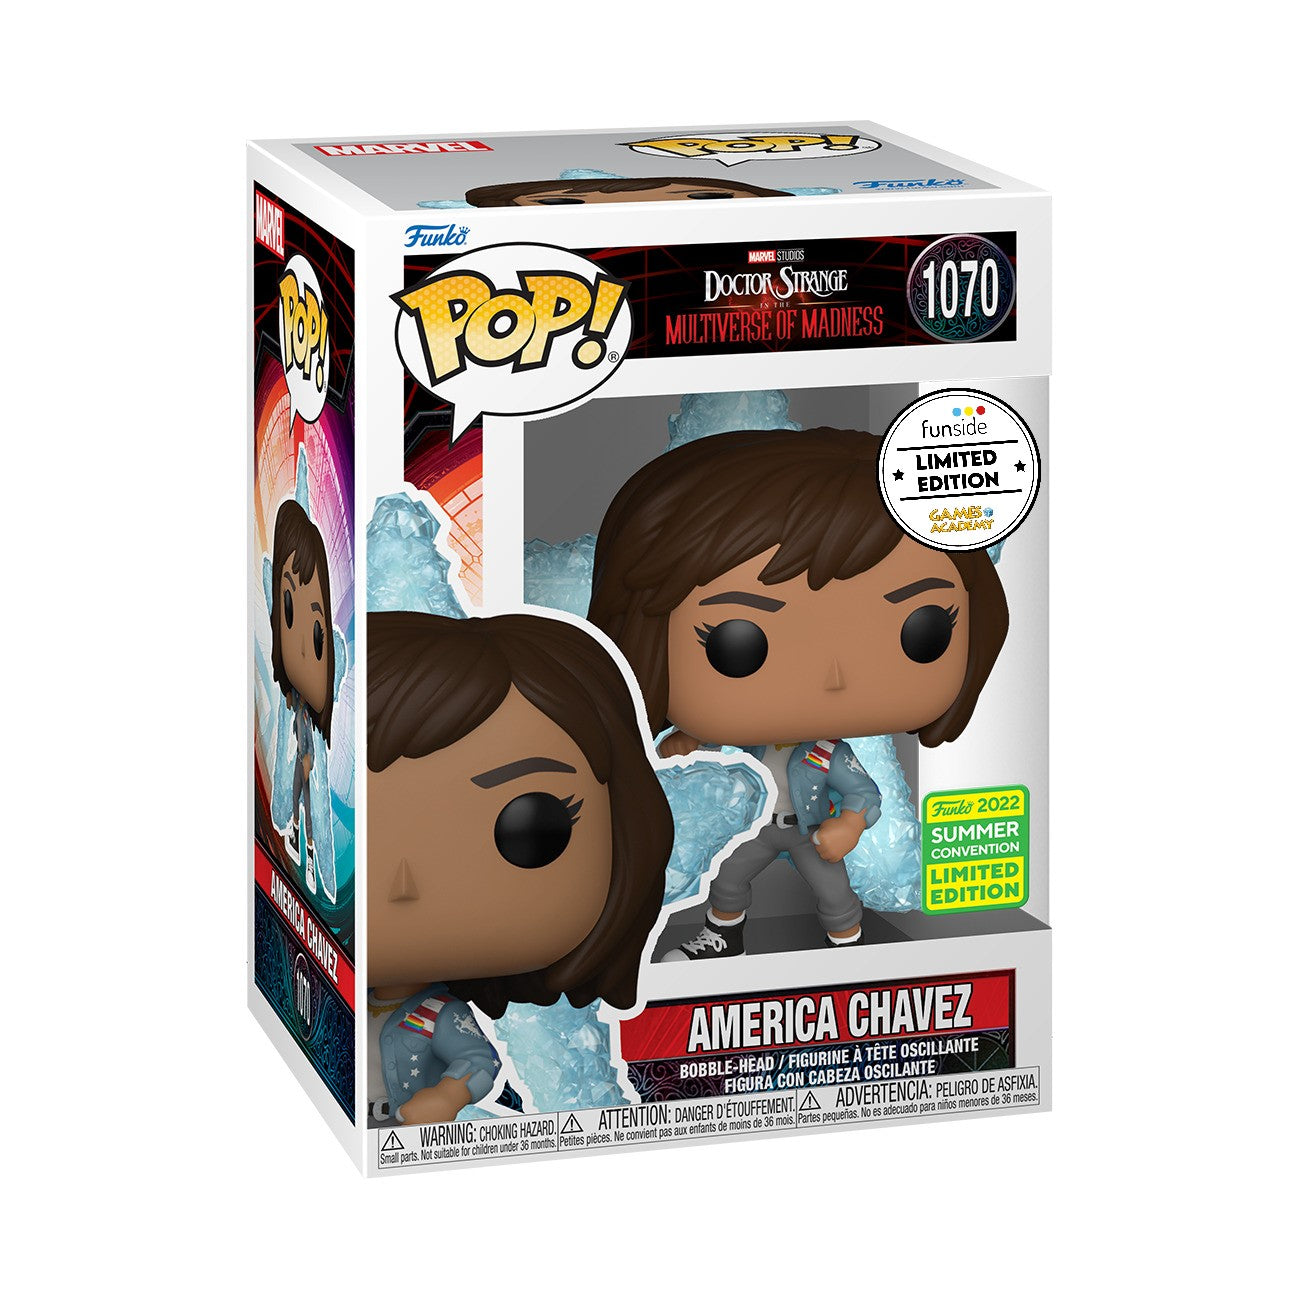 MARVEL: DOCTOR STRANGE IN THE MULTIVERSE OF MADNESS - POP FUNKO VINYL FIGURE 1070 AMERICA CHAVEZ - GA EXCL SDCC 2022